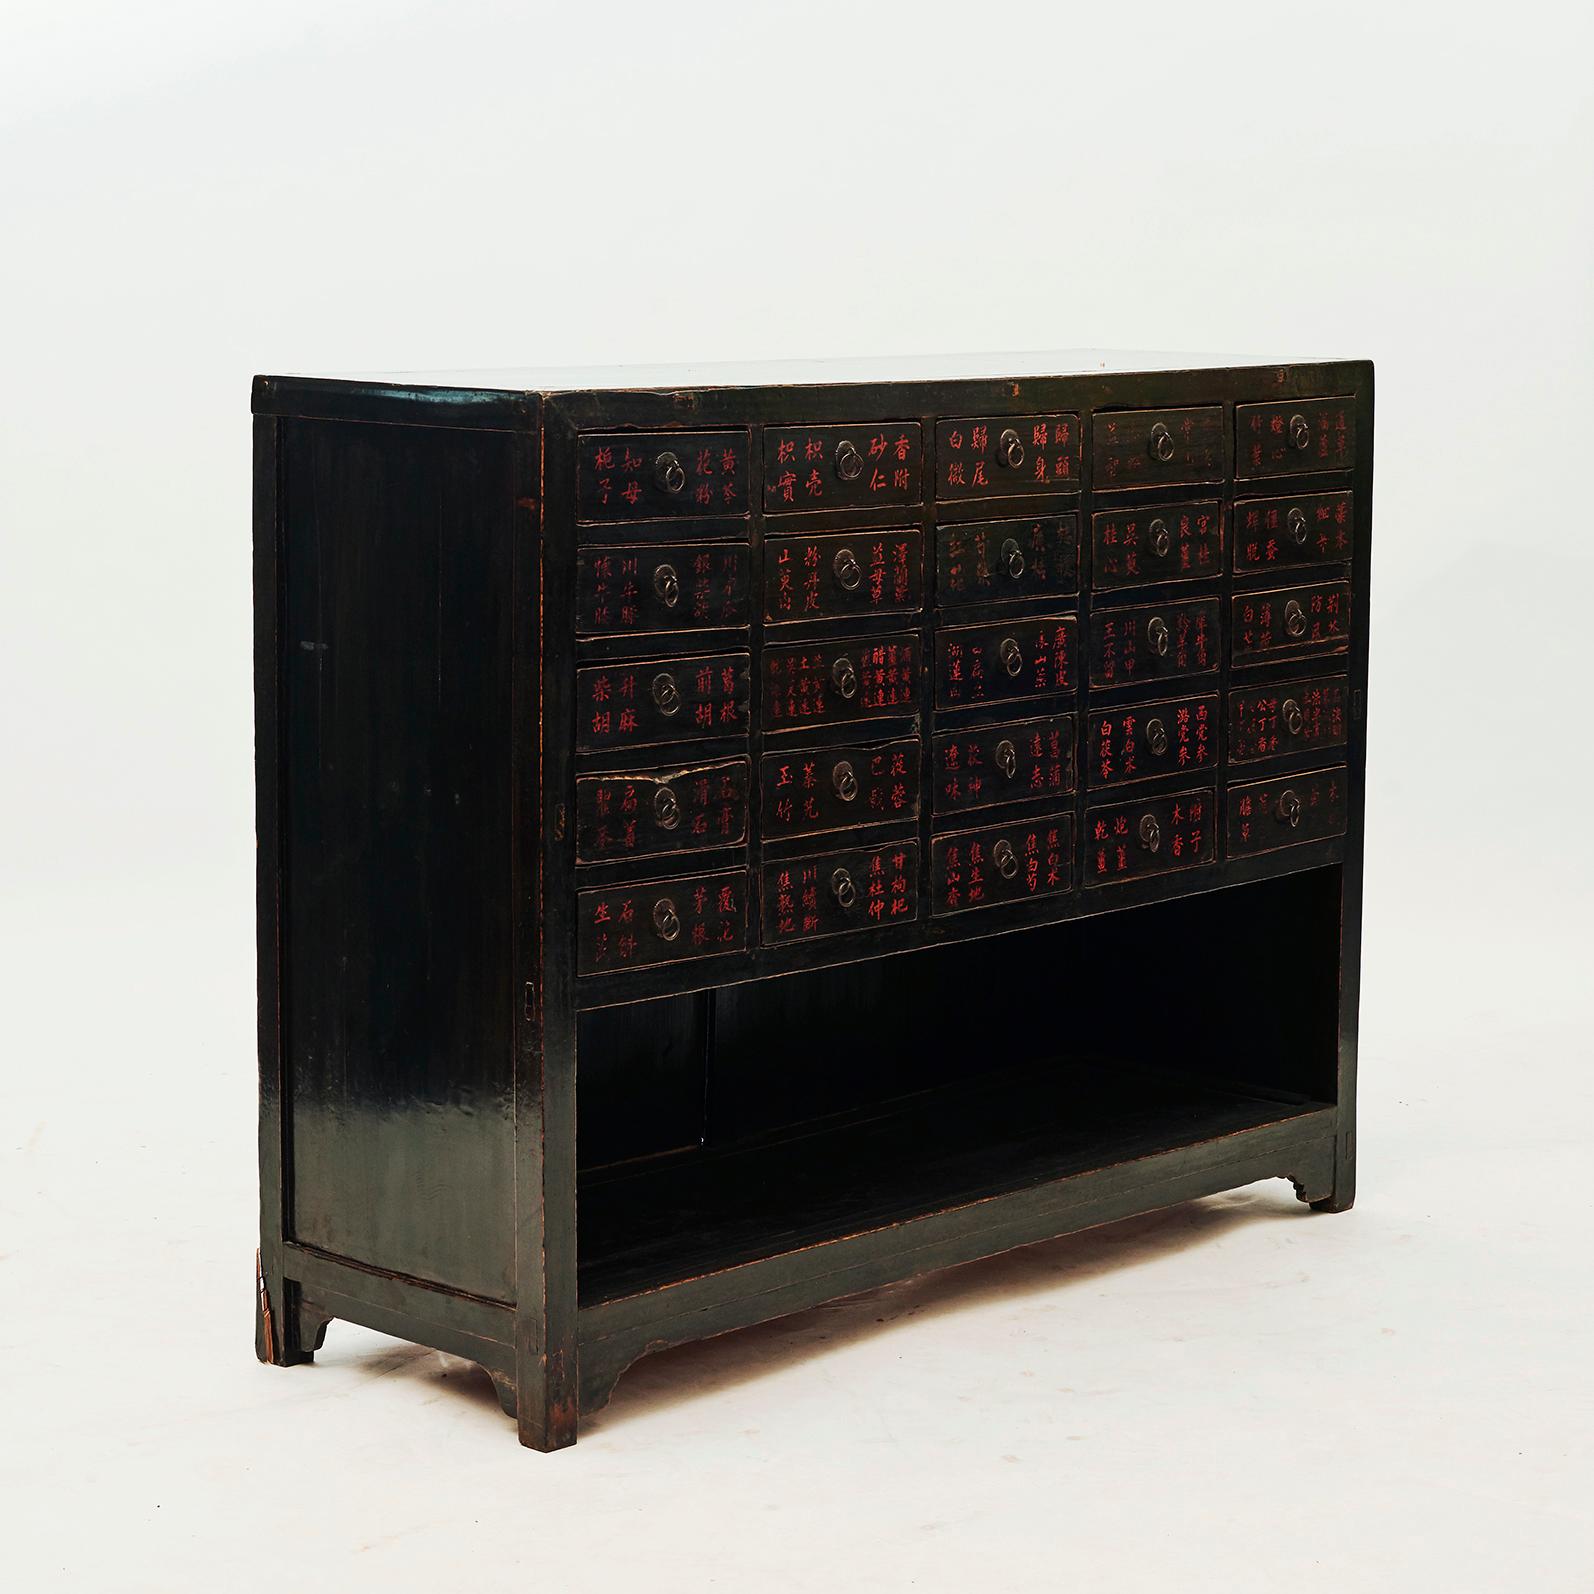 Beautiful Chinese apothecary medicine chests dating to circa 1840-1860, China with original dark (burgundy / black) lacquer.
25 drawers with Chinese characters describing the content of the drawer.

Previously in China, the doctor and pharmacist